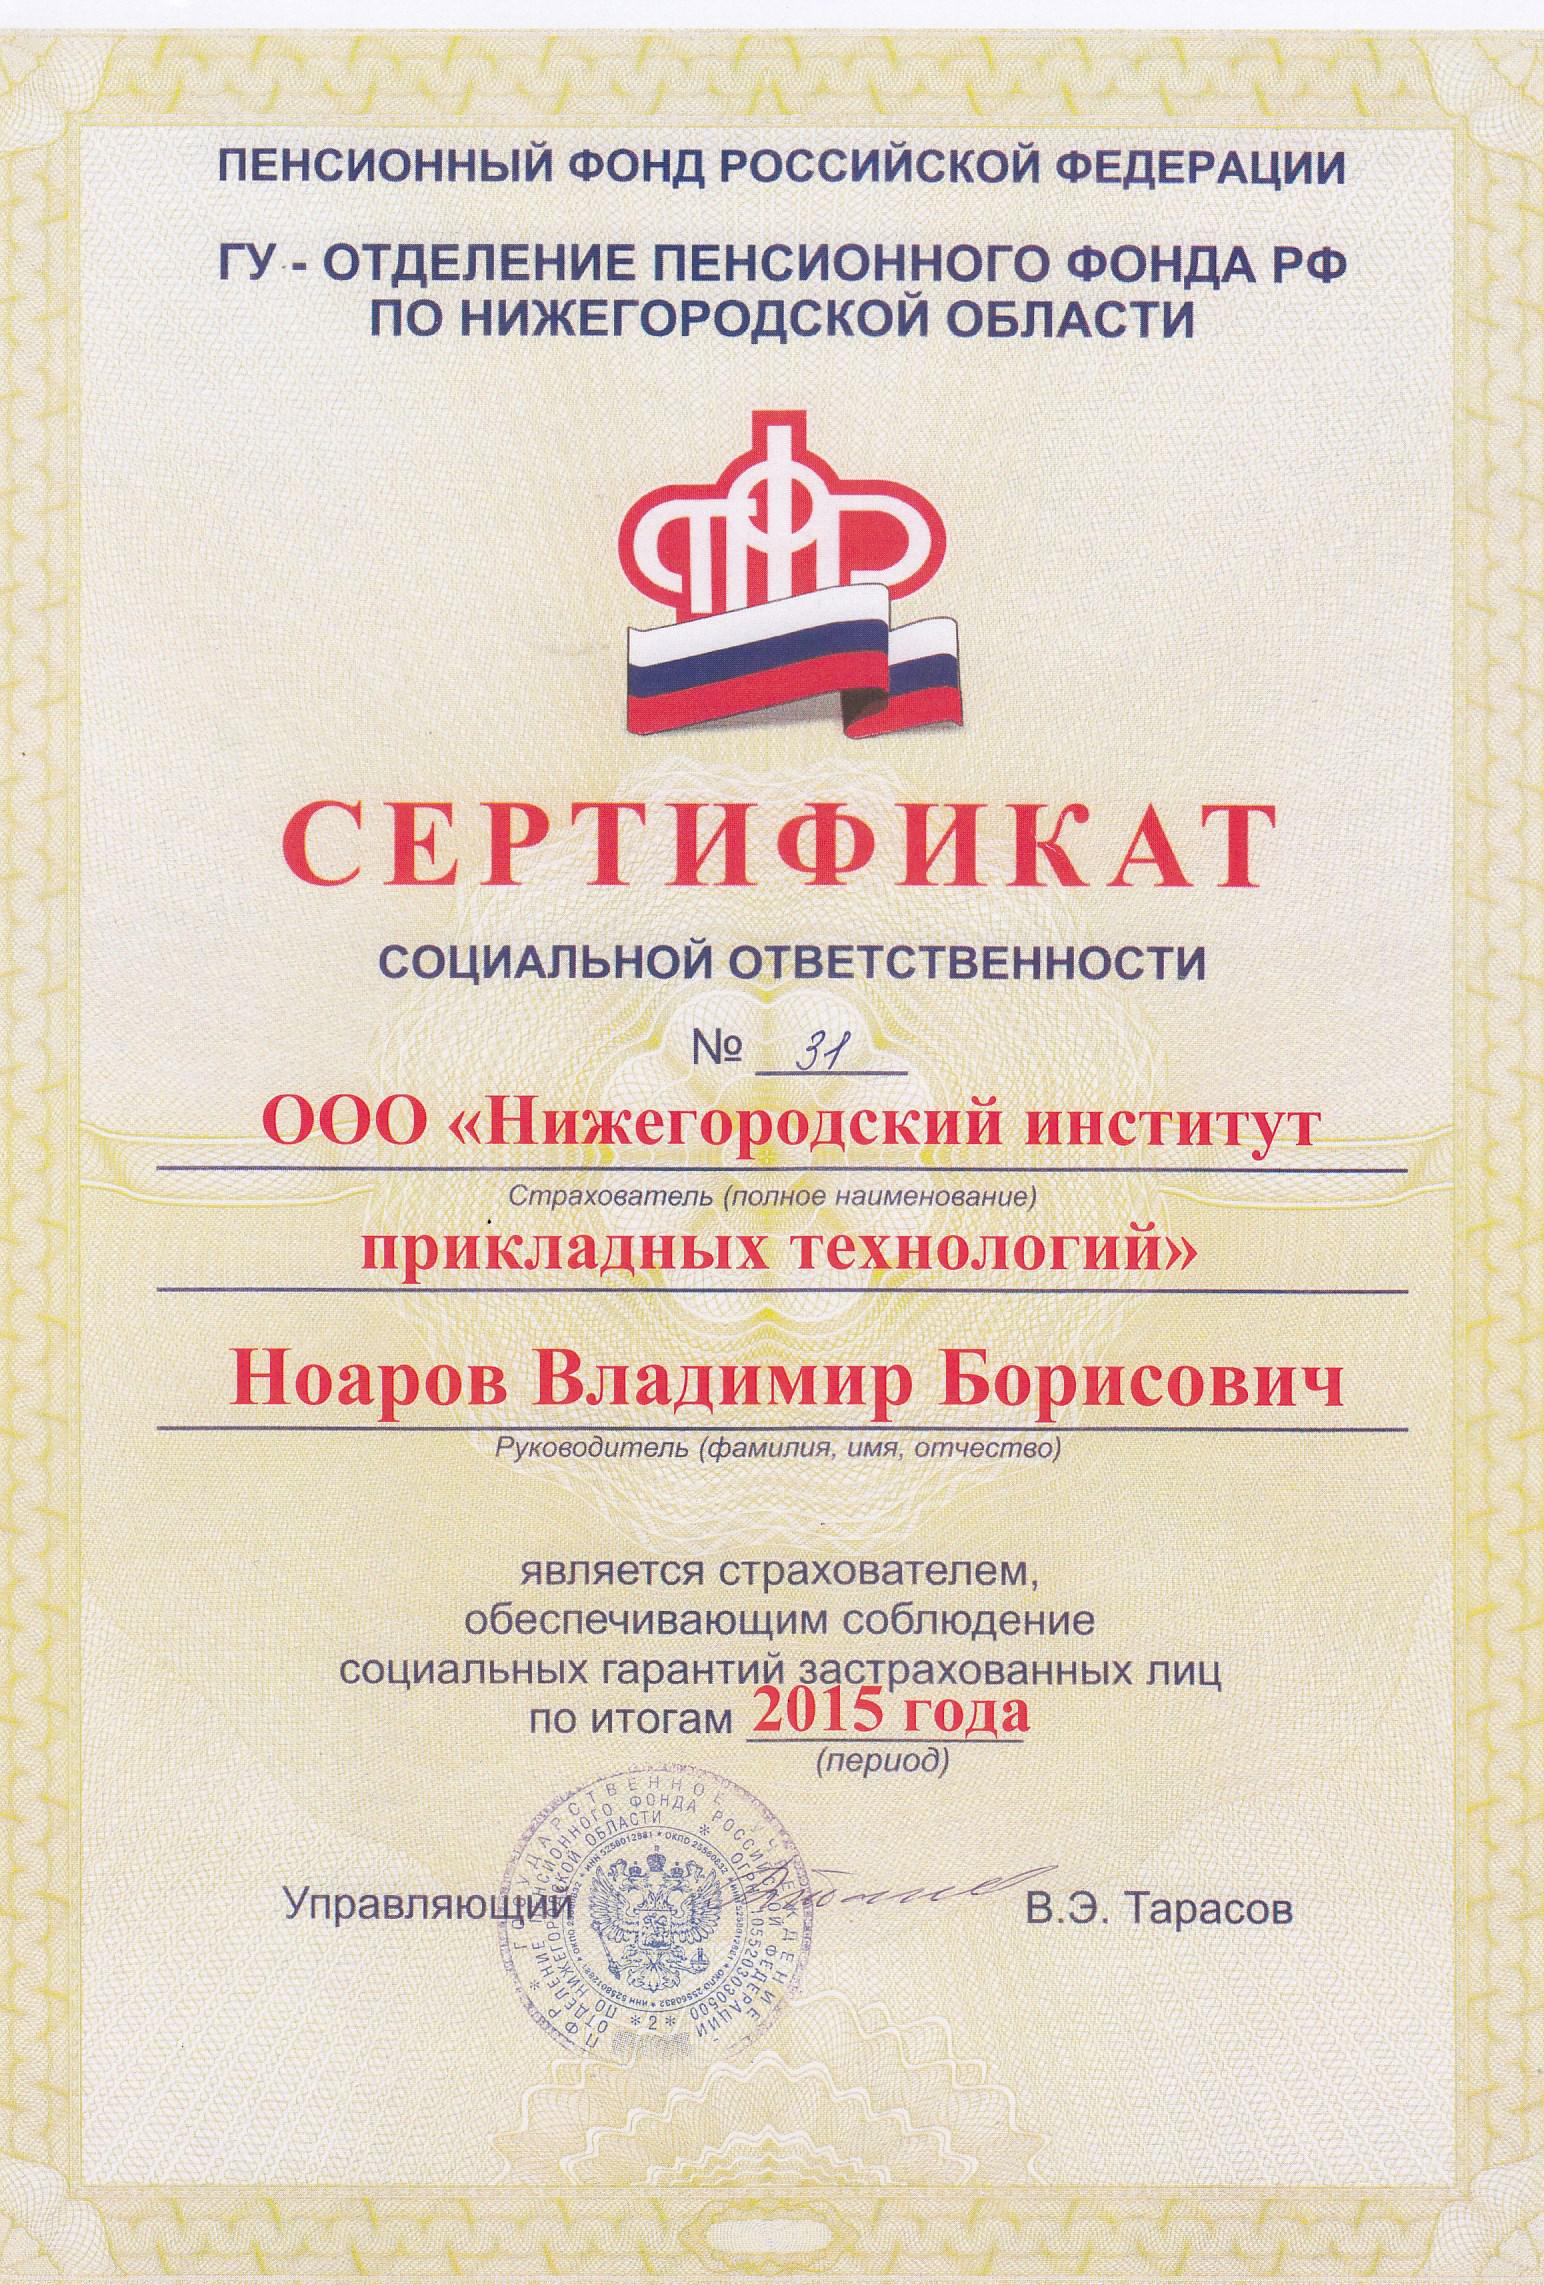 The company receives Social Responsibility Certificate